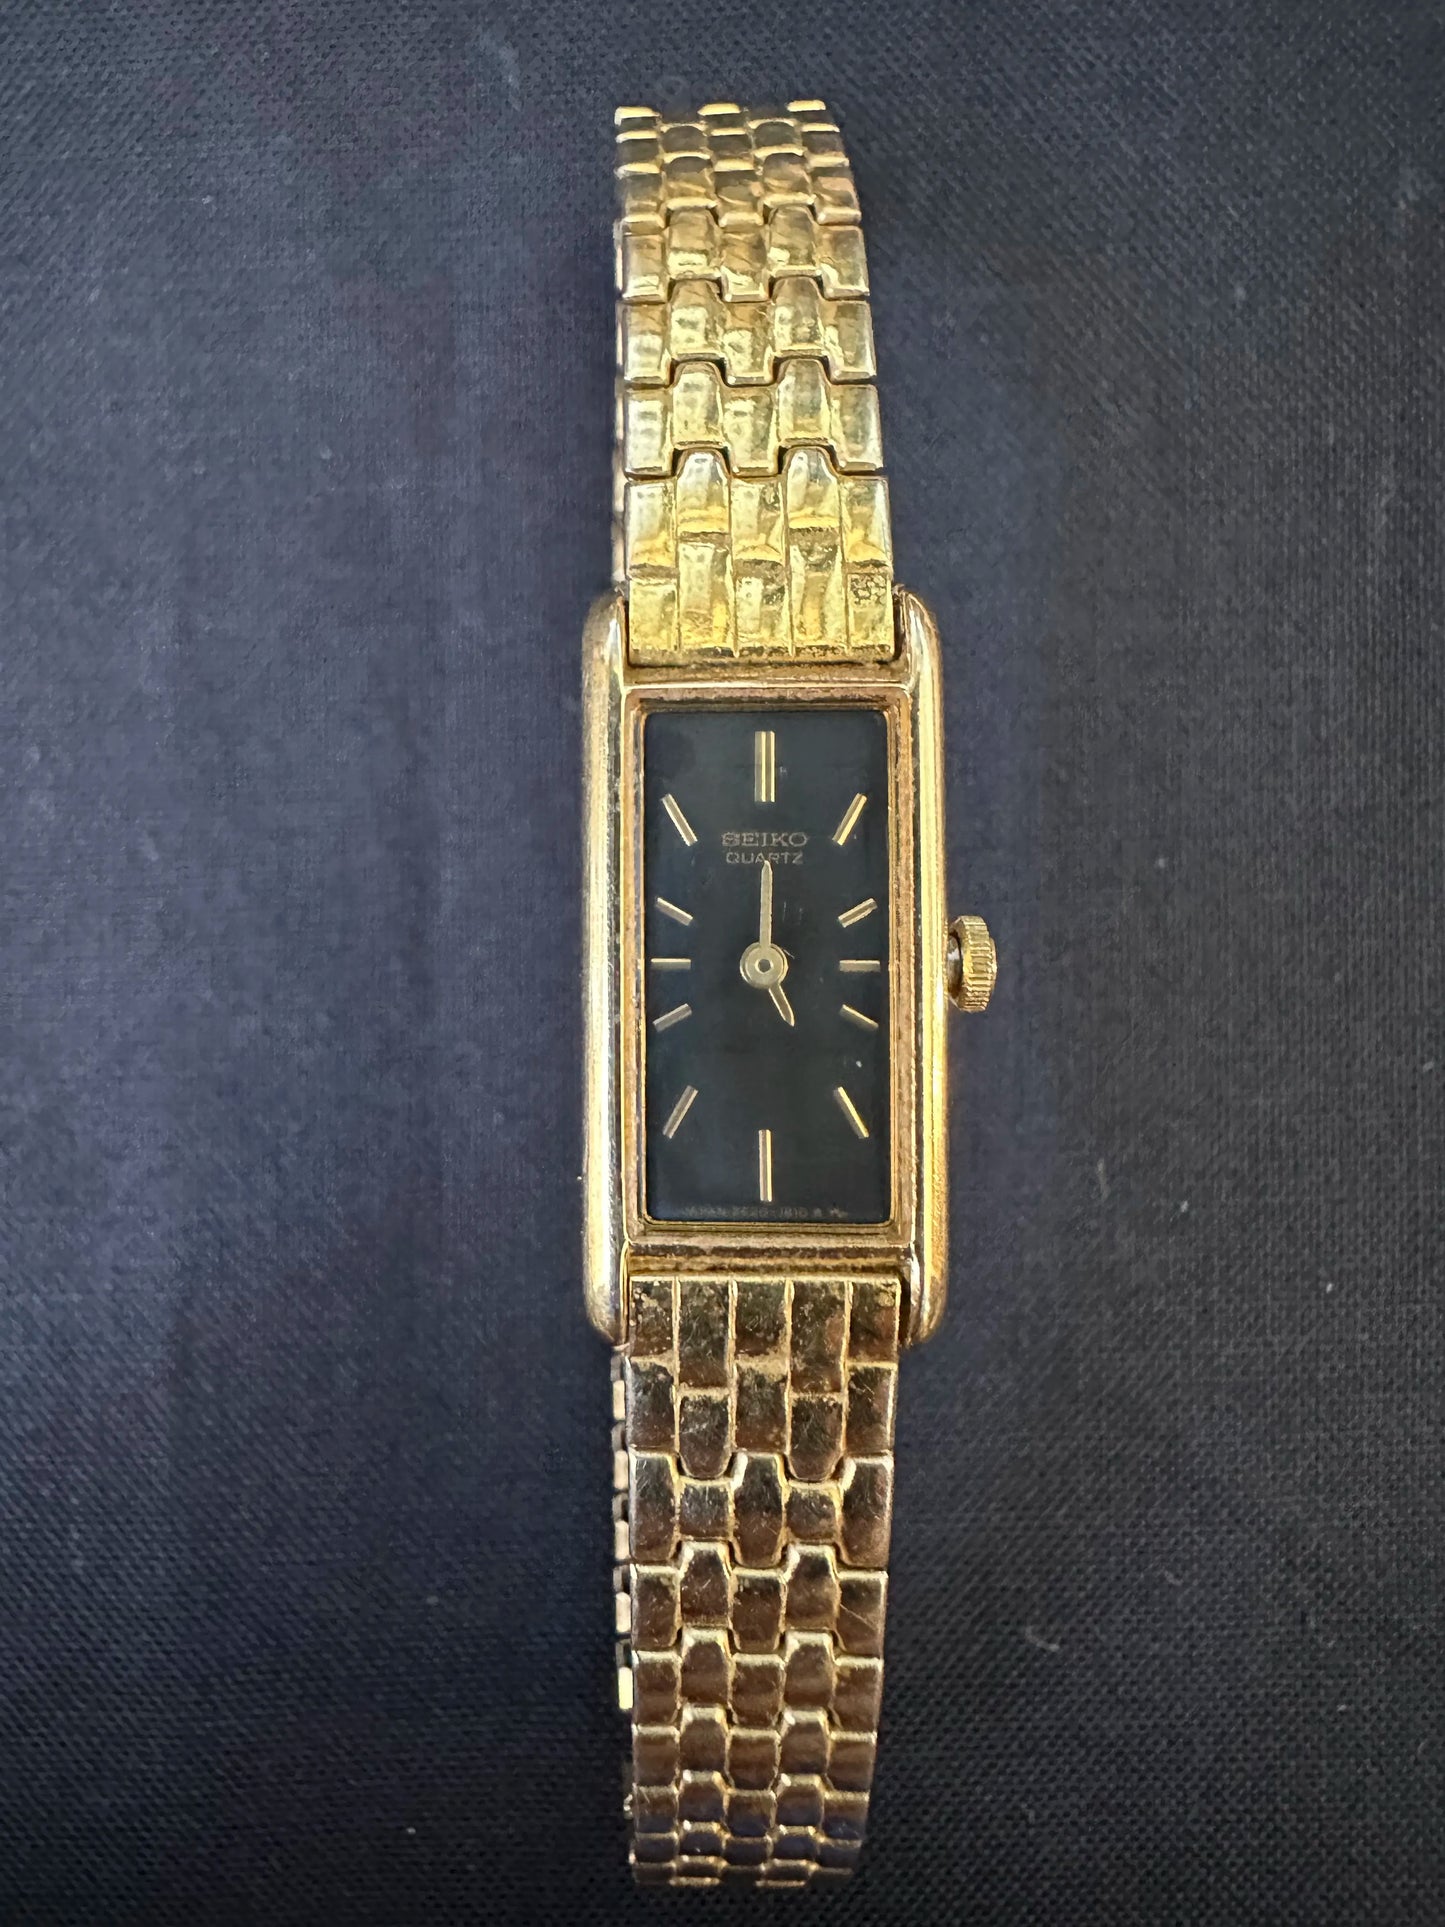 Seiko Women's Vintage Watch 2E20-6429 - Gold color with Black Face